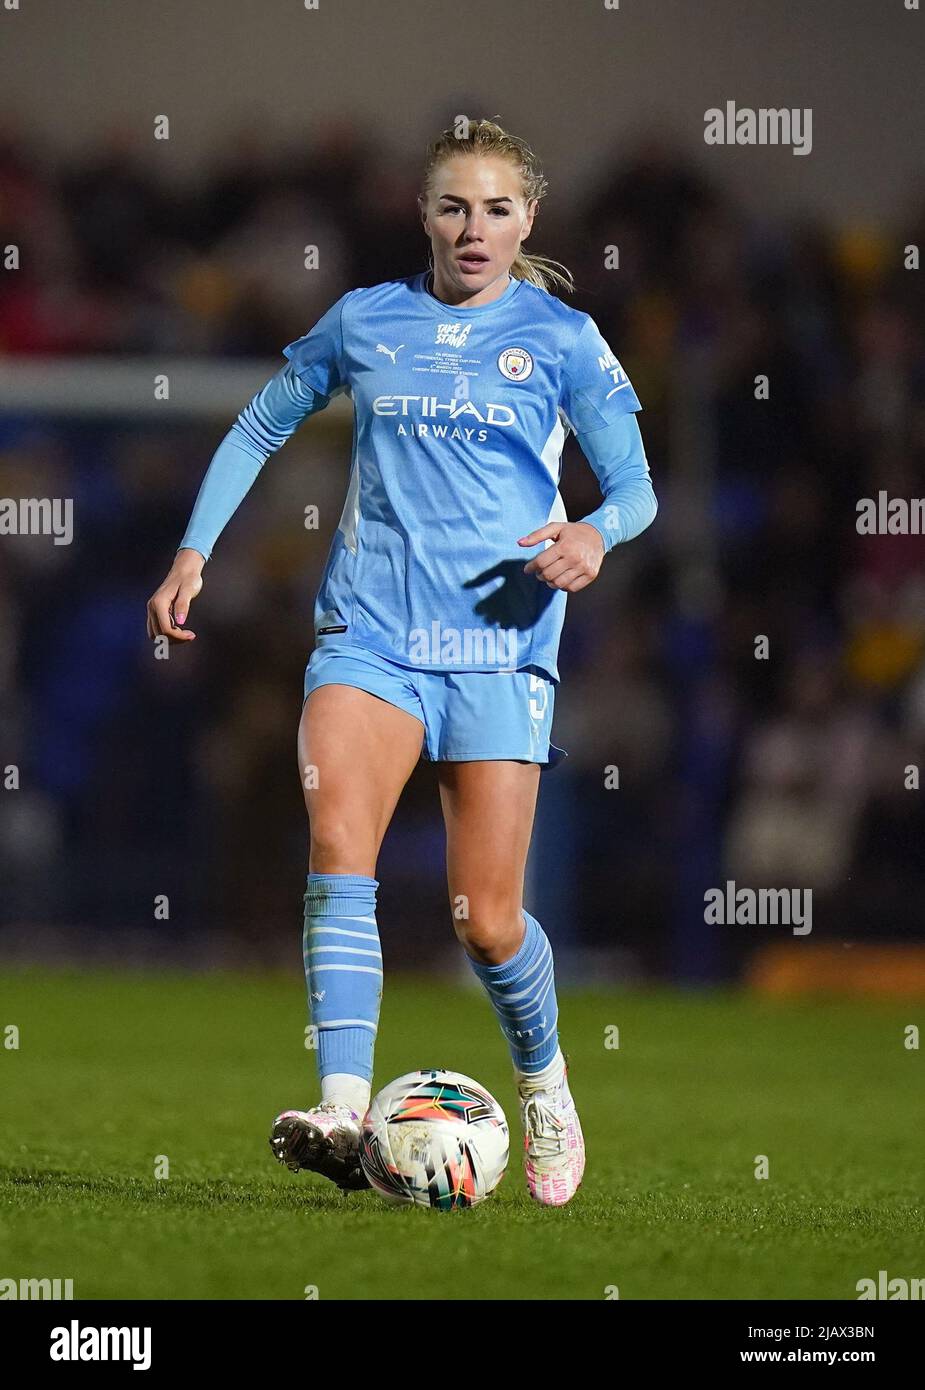 File photo dated 05-03-2022 of Manchester City's Alex Greenwood. Hemp has also made the shortlist for the PFA Women’s Player of the Year alongside City team-mate Alex Greenwood. The pair face stiff competition from Chelsea duo Sam Kerr and Pernille Harder, who helped their team win the domestic double. Arsenal’s classy Dutch forward Vivianne Miedema and her Gunners team-mate Kim Little compete the main player of the year shortlist. . Issue date: Wednesday June 1, 2022. Stock Photo